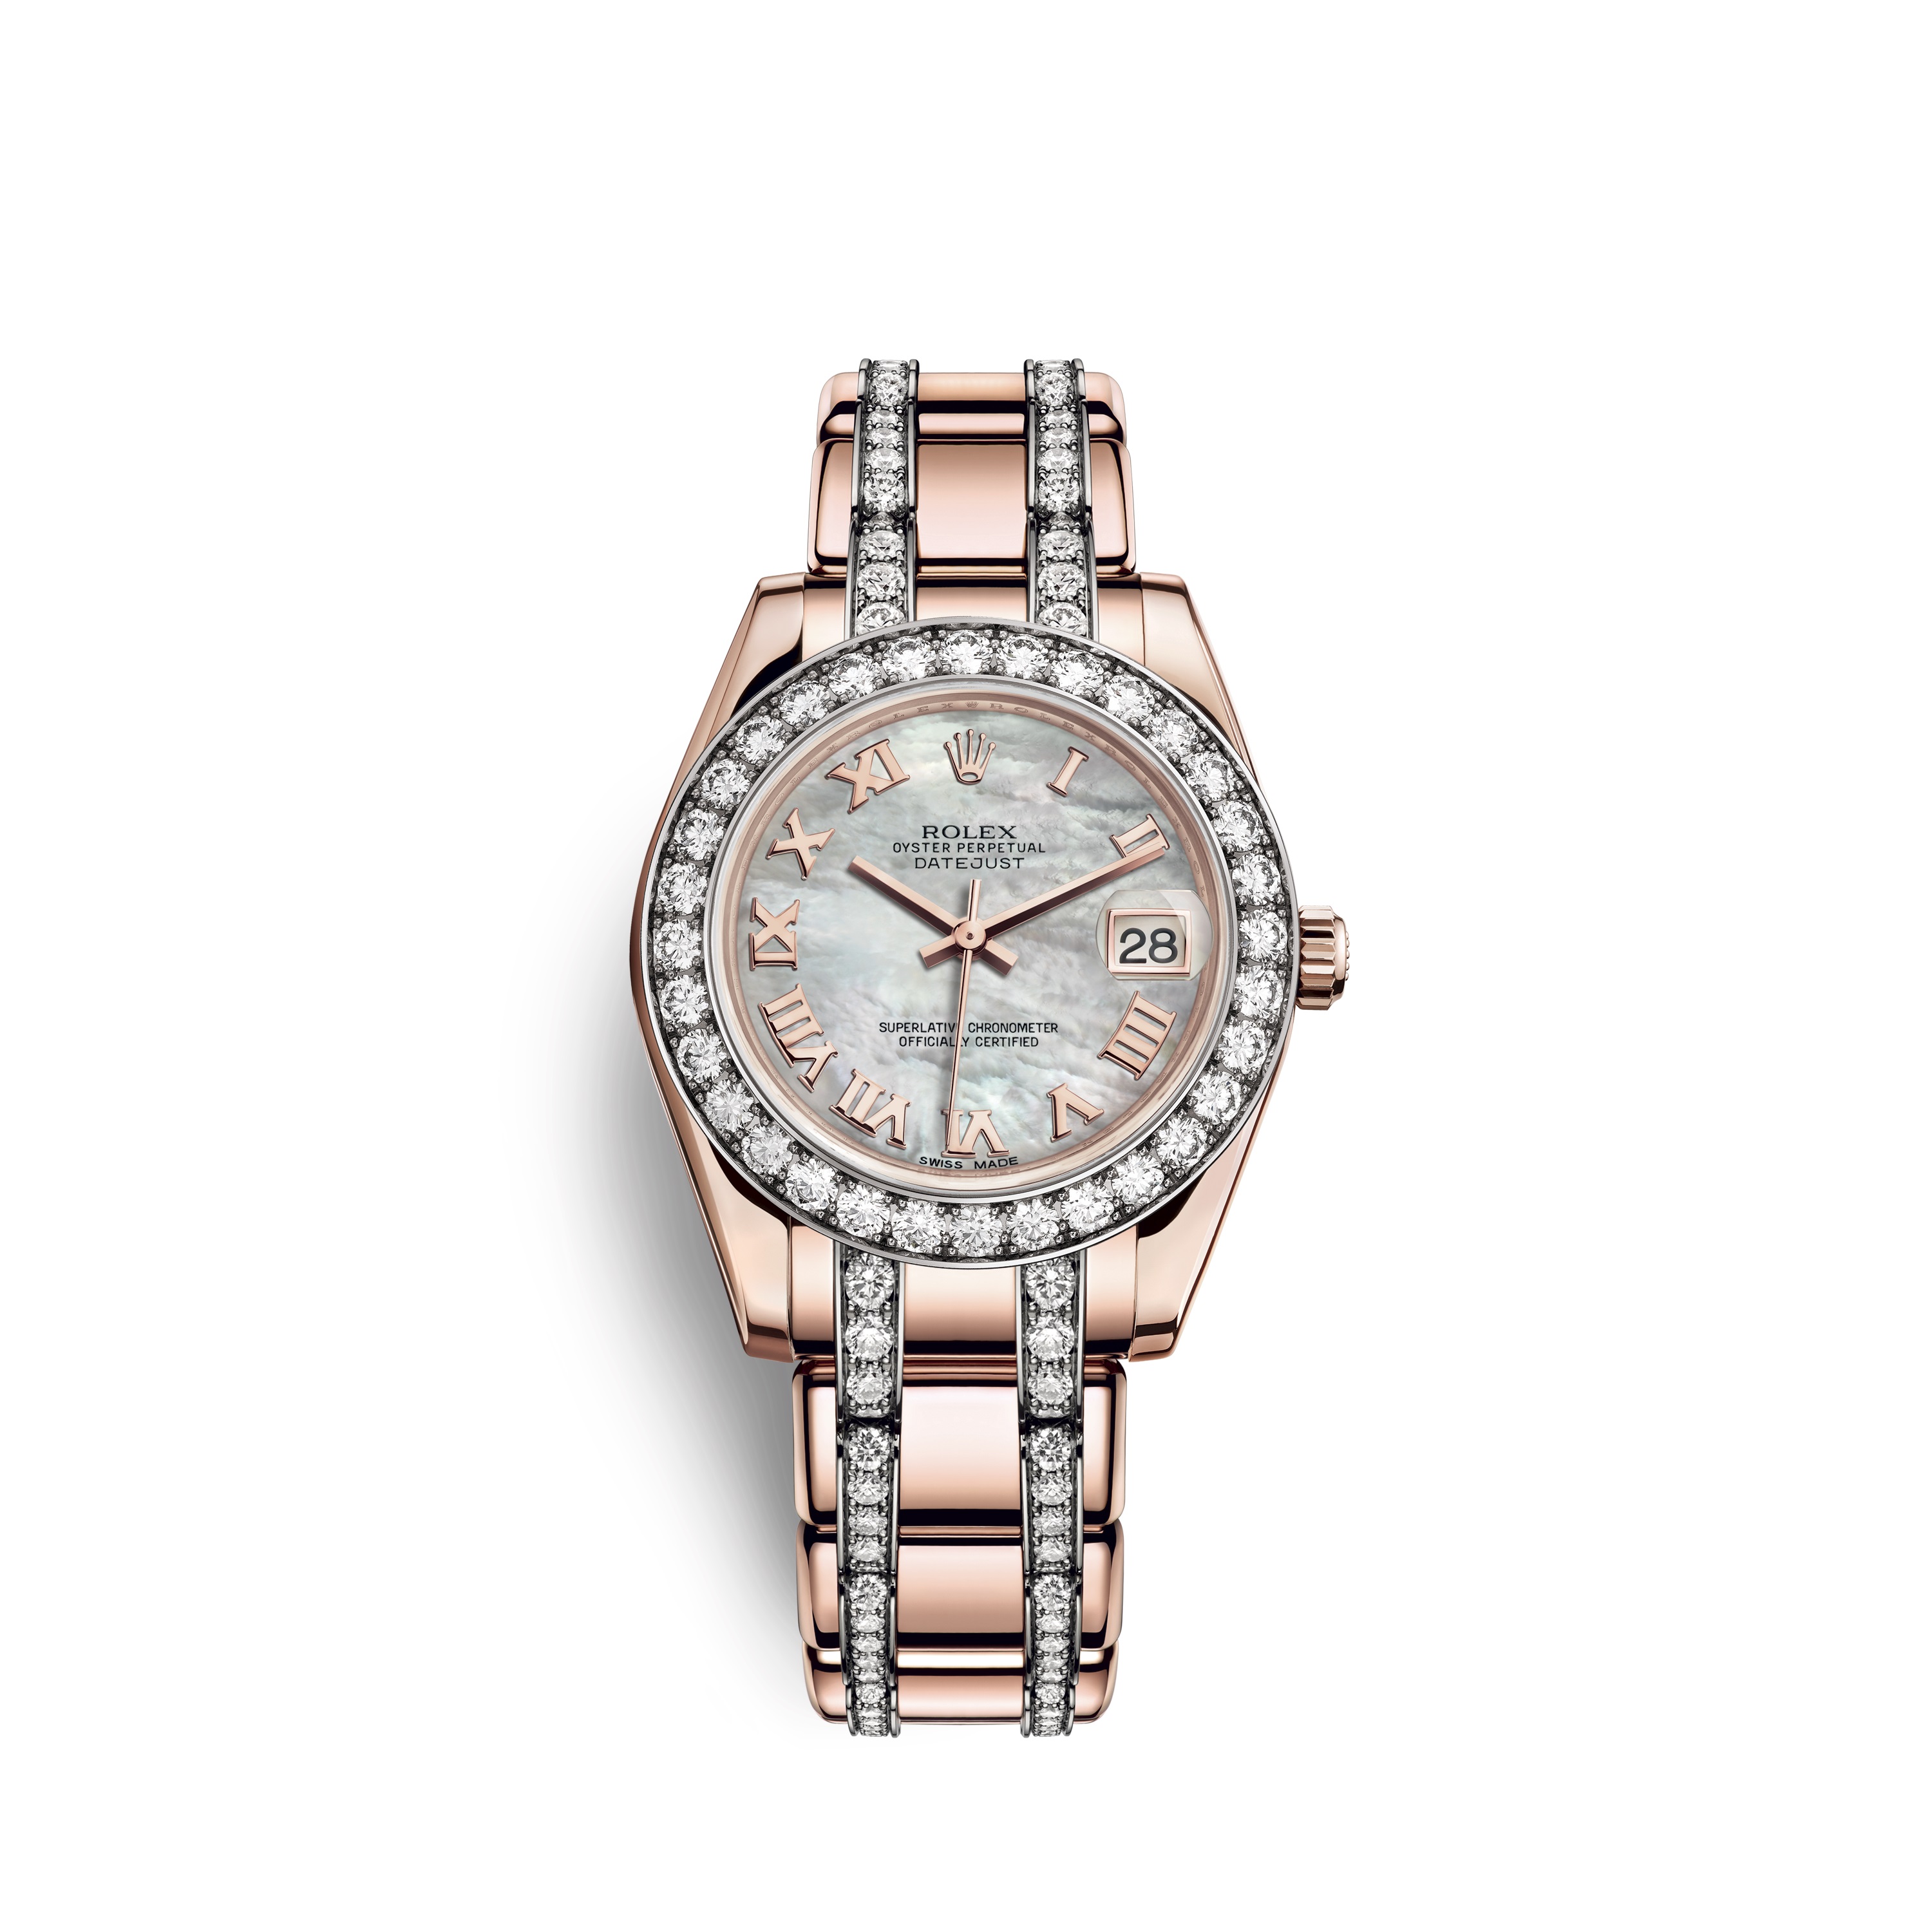 Pearlmaster 34 81285 Rose Gold & Diamonds Watch (White Mother-of-Pearl)